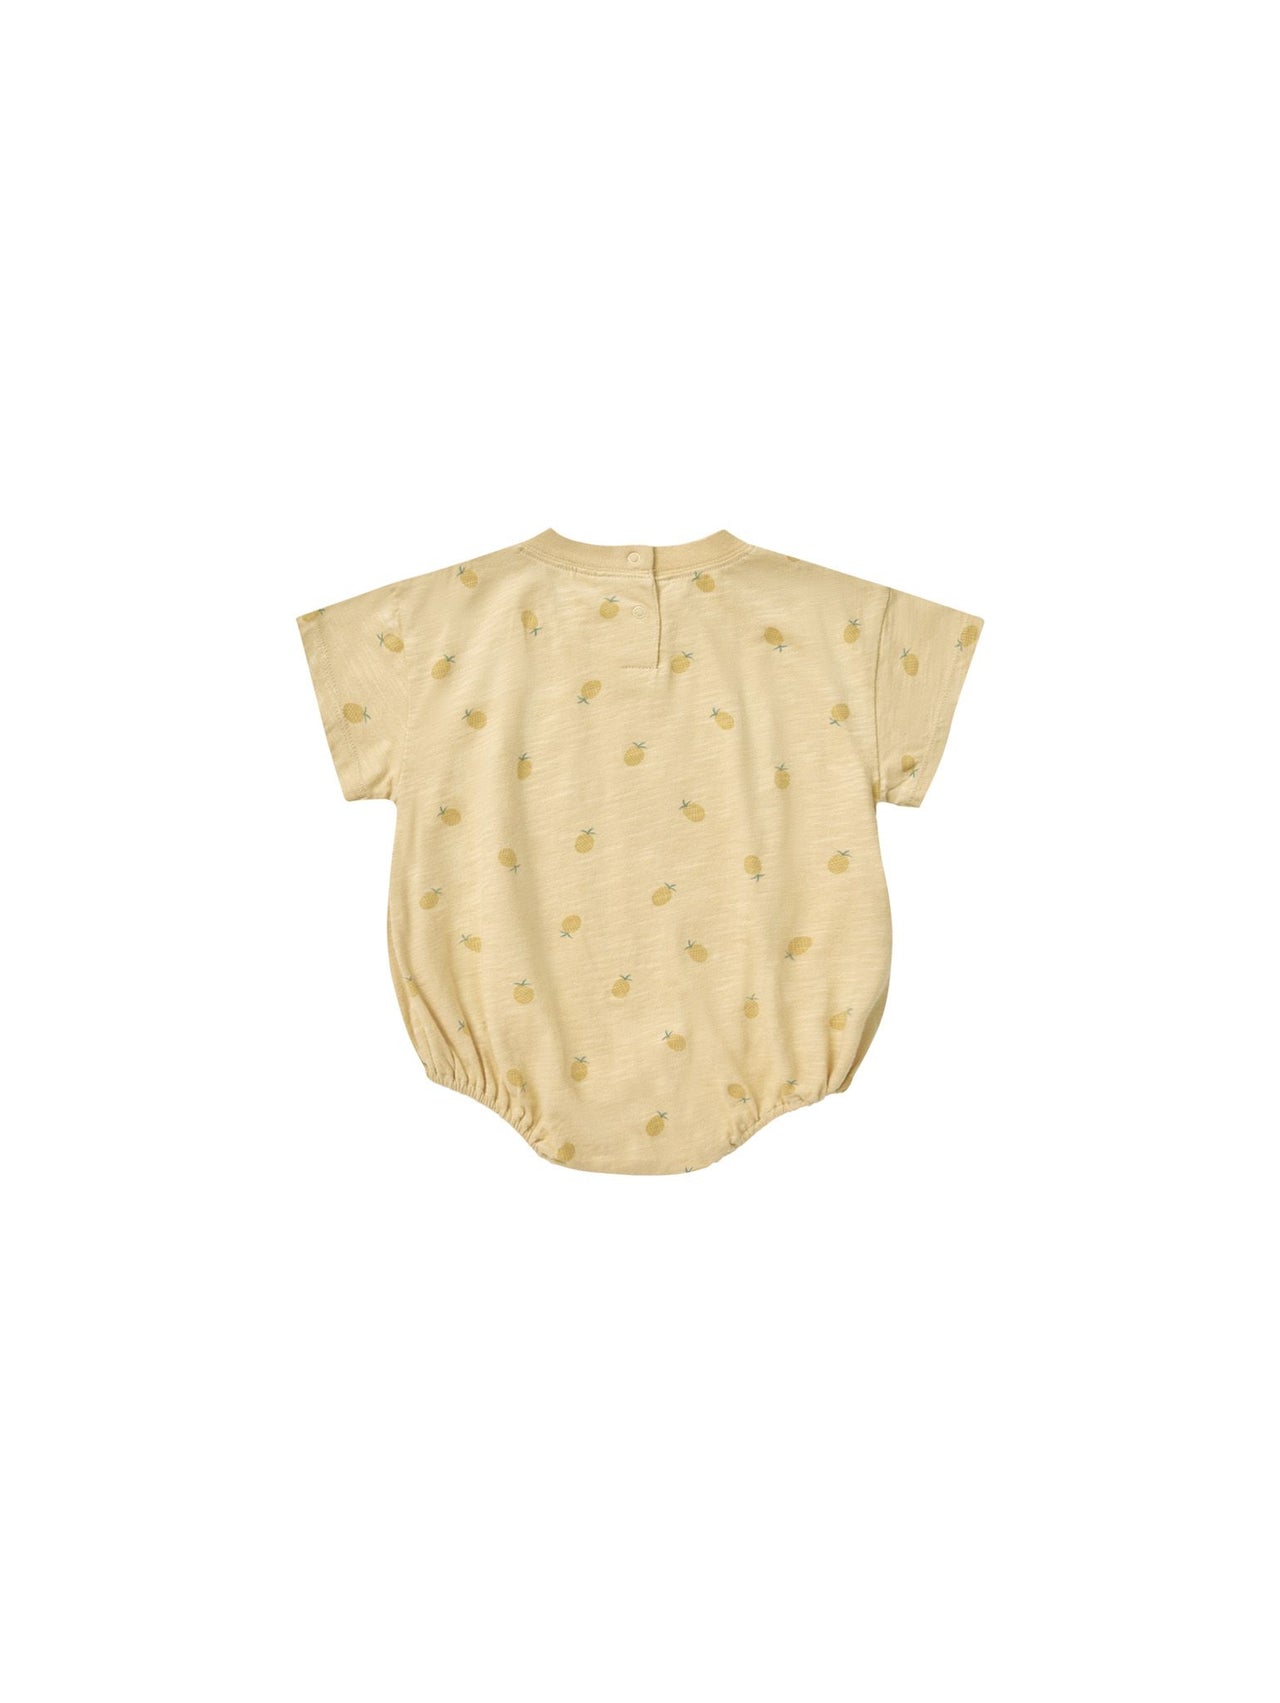 Rylee + Cru Relaxed Bubble Romper, Pineapple